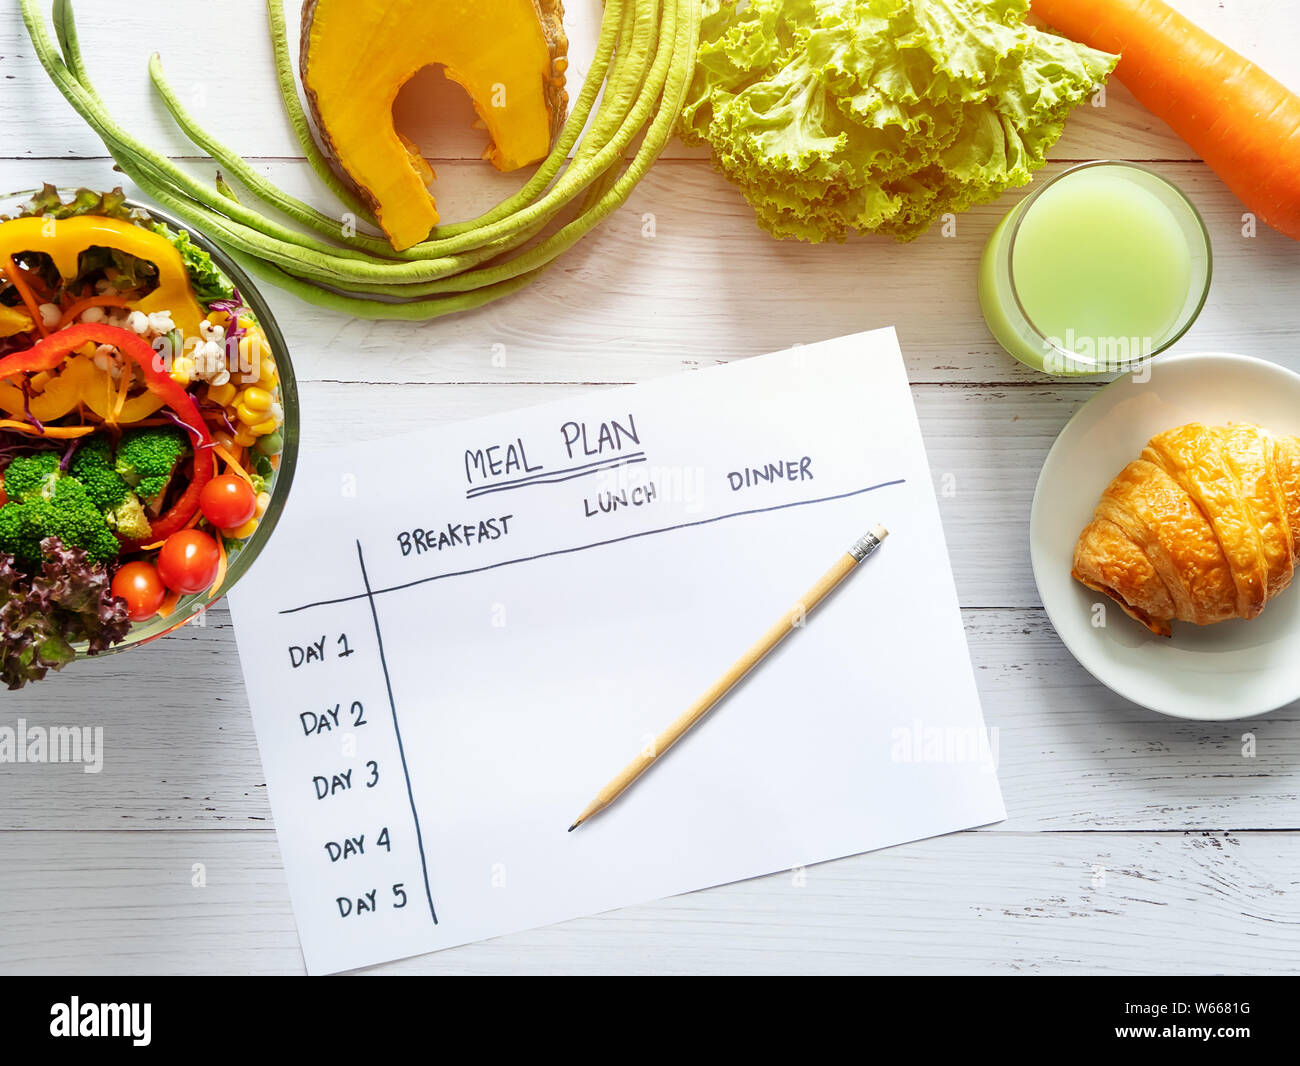 Calories control, meal plan, food diet and weight loss concept. top view of meal plan table on paper with salad, fruit juice, bread and vegetable Stock Photo